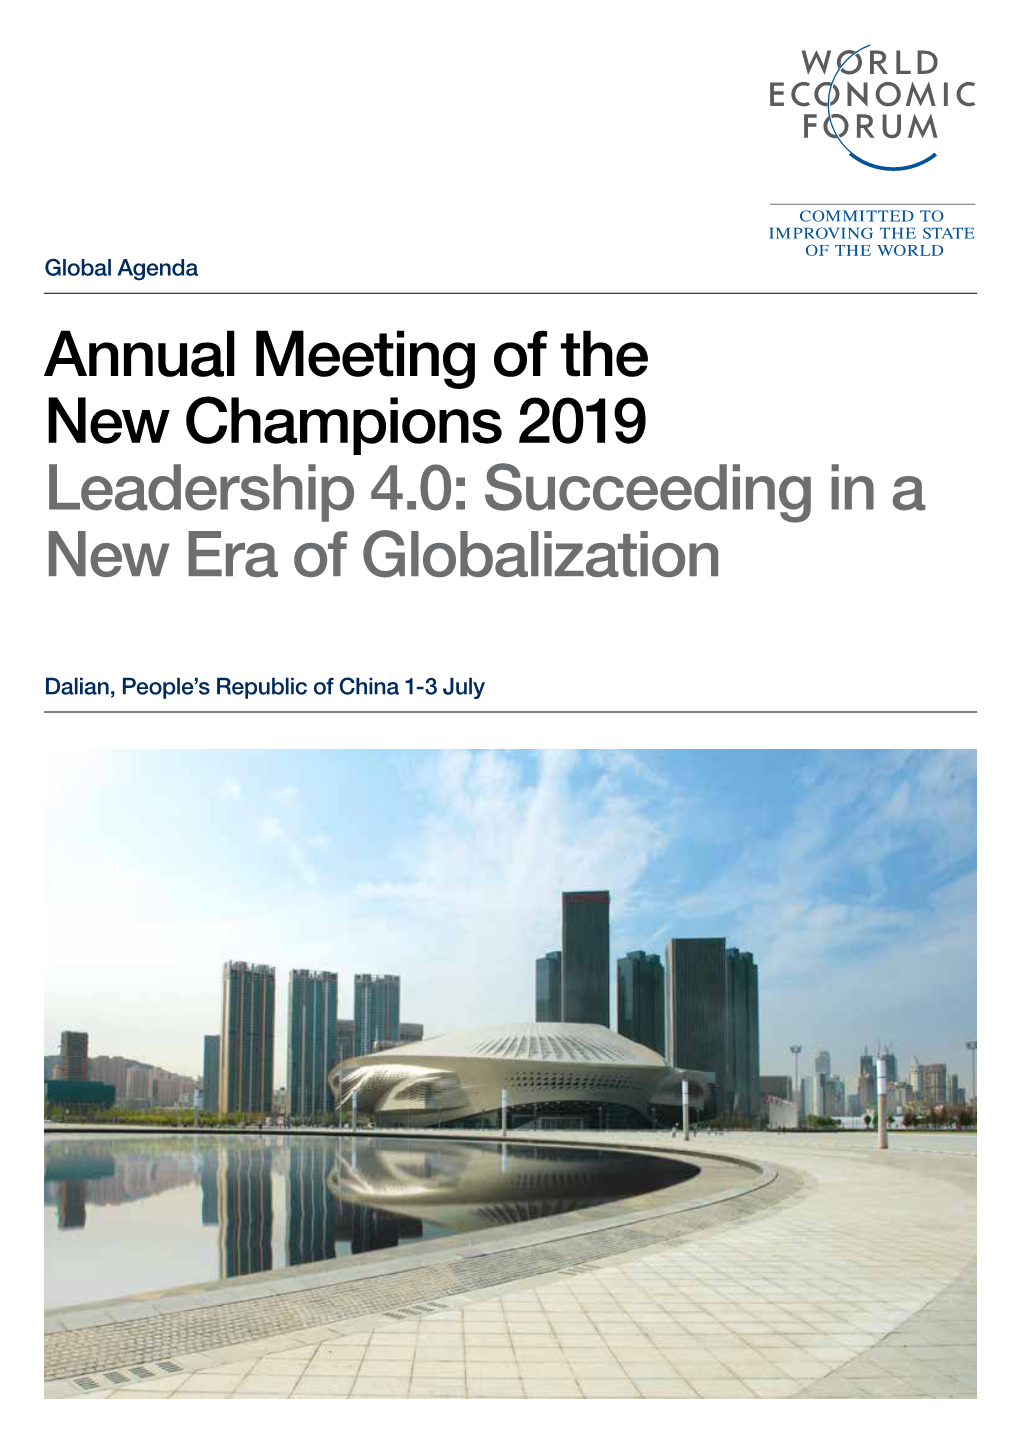 Annual Meeting of the New Champions 2019 Leadership 4.0: Succeeding in a New Era of Globalization